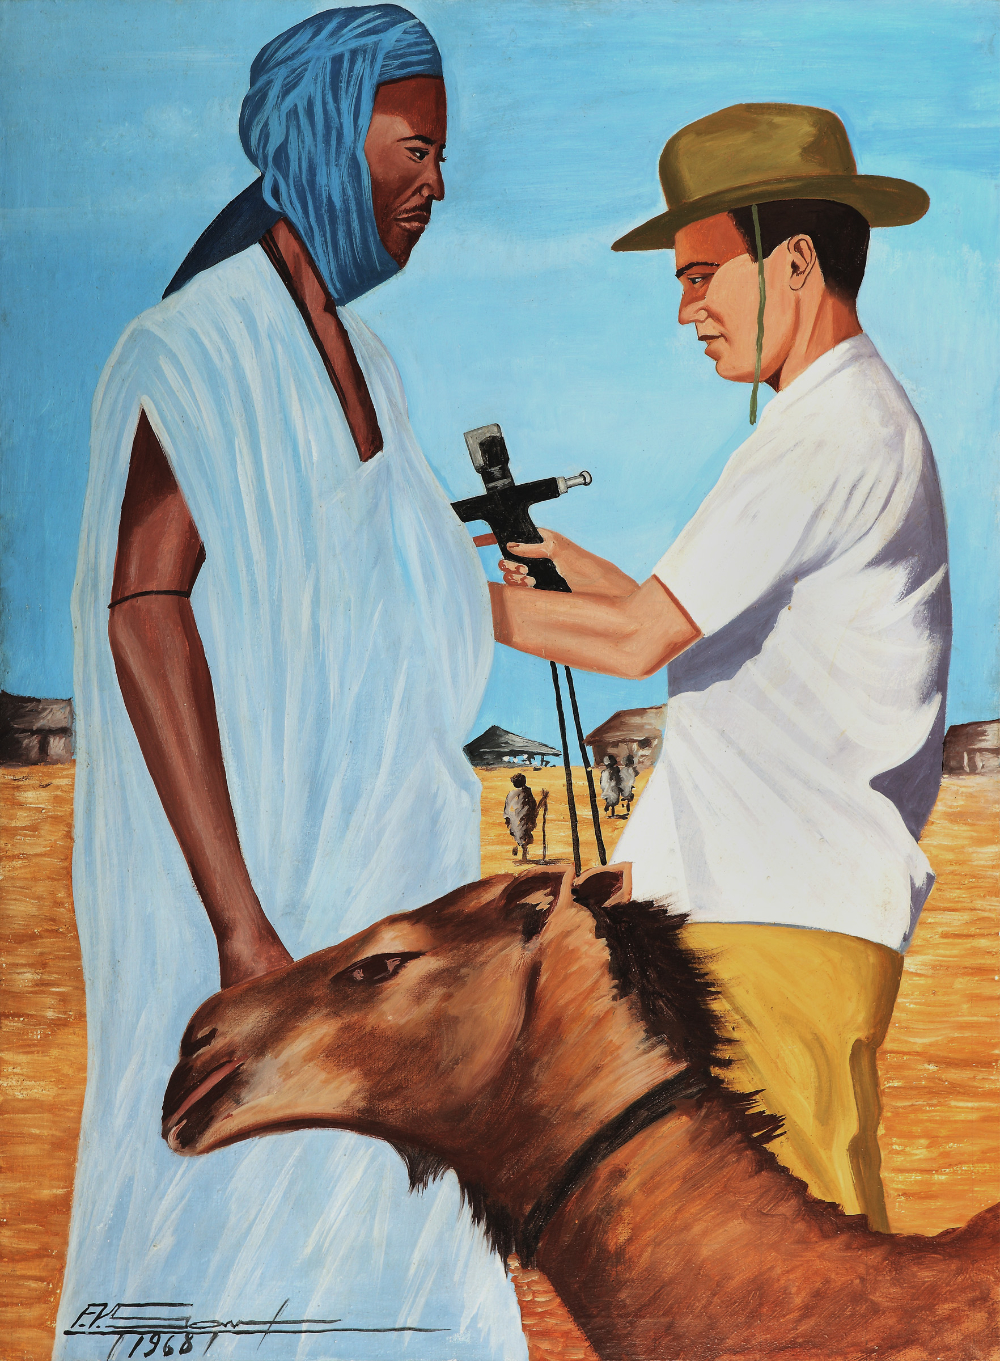 thumbnail of Dr. Pascal James Imperato Vaccinating a Maure Nomad against Smallpox in Timbuktu. medium: acrylic on canvas. date: 1968. dimensions: 75.8 x 56.6 cm